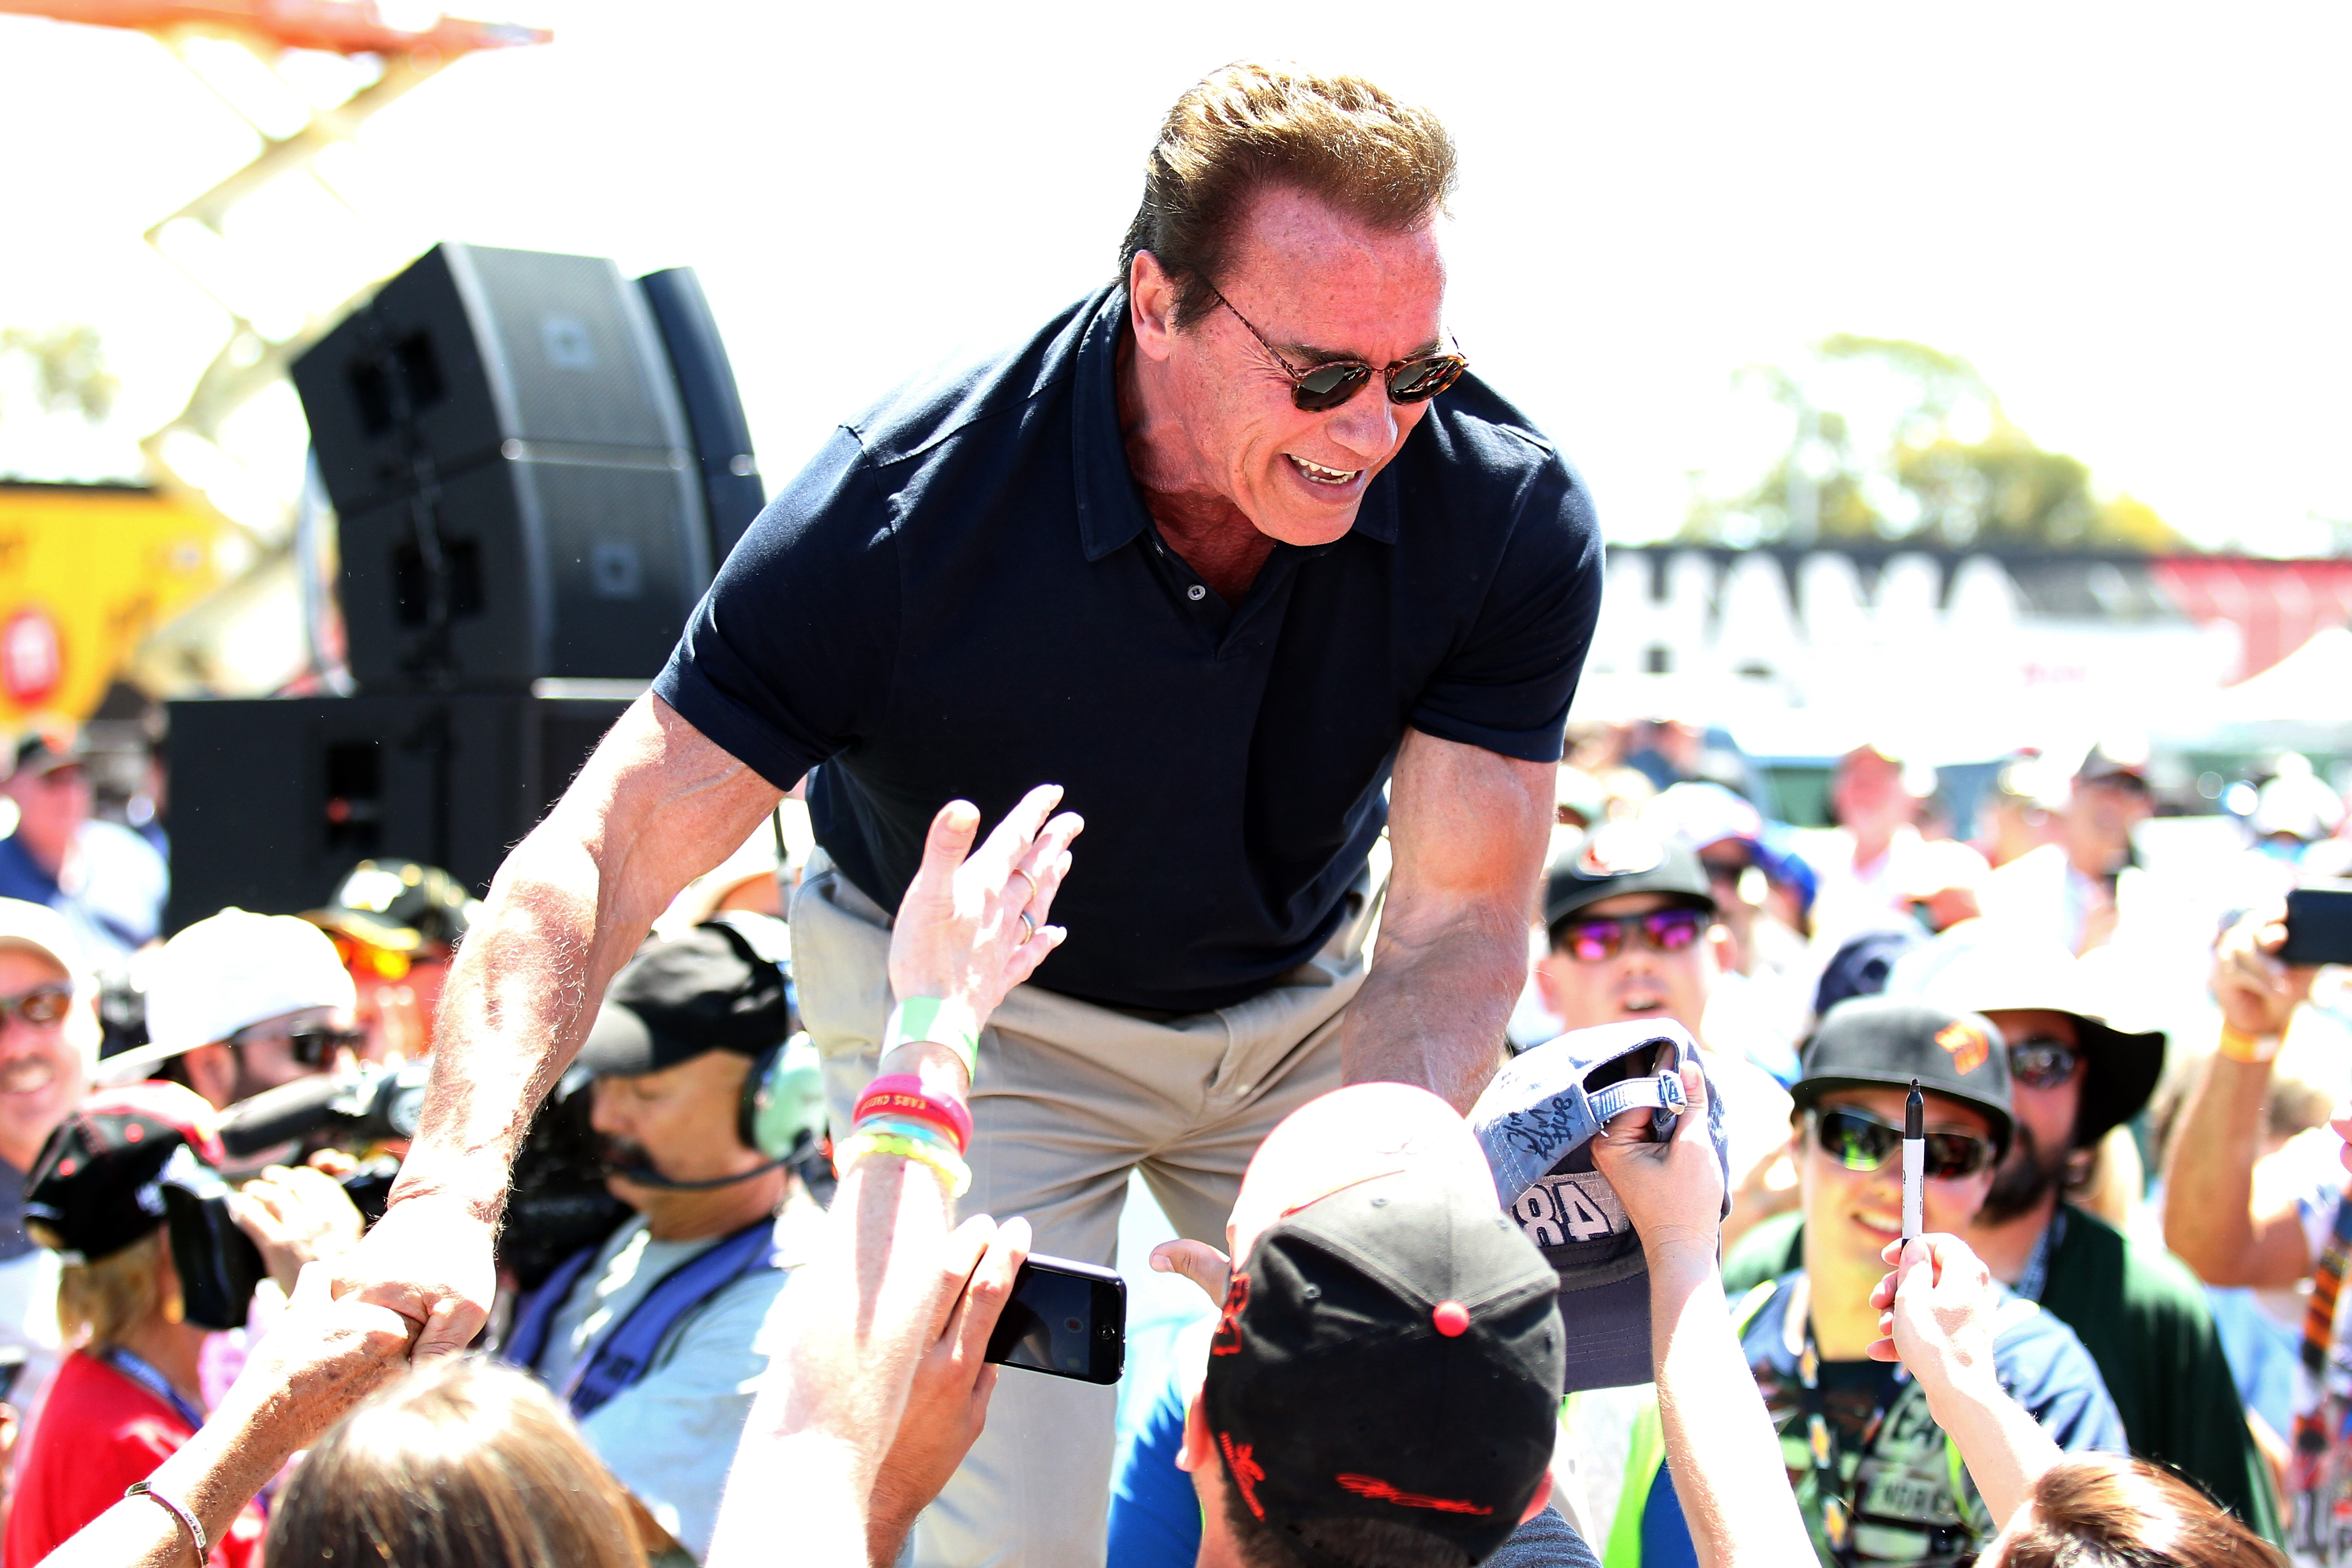 Actor and former governor of California Arnold Schwarzenegger greets fans at a NASCAR event on June 28, 2015, in Sonoma, California.